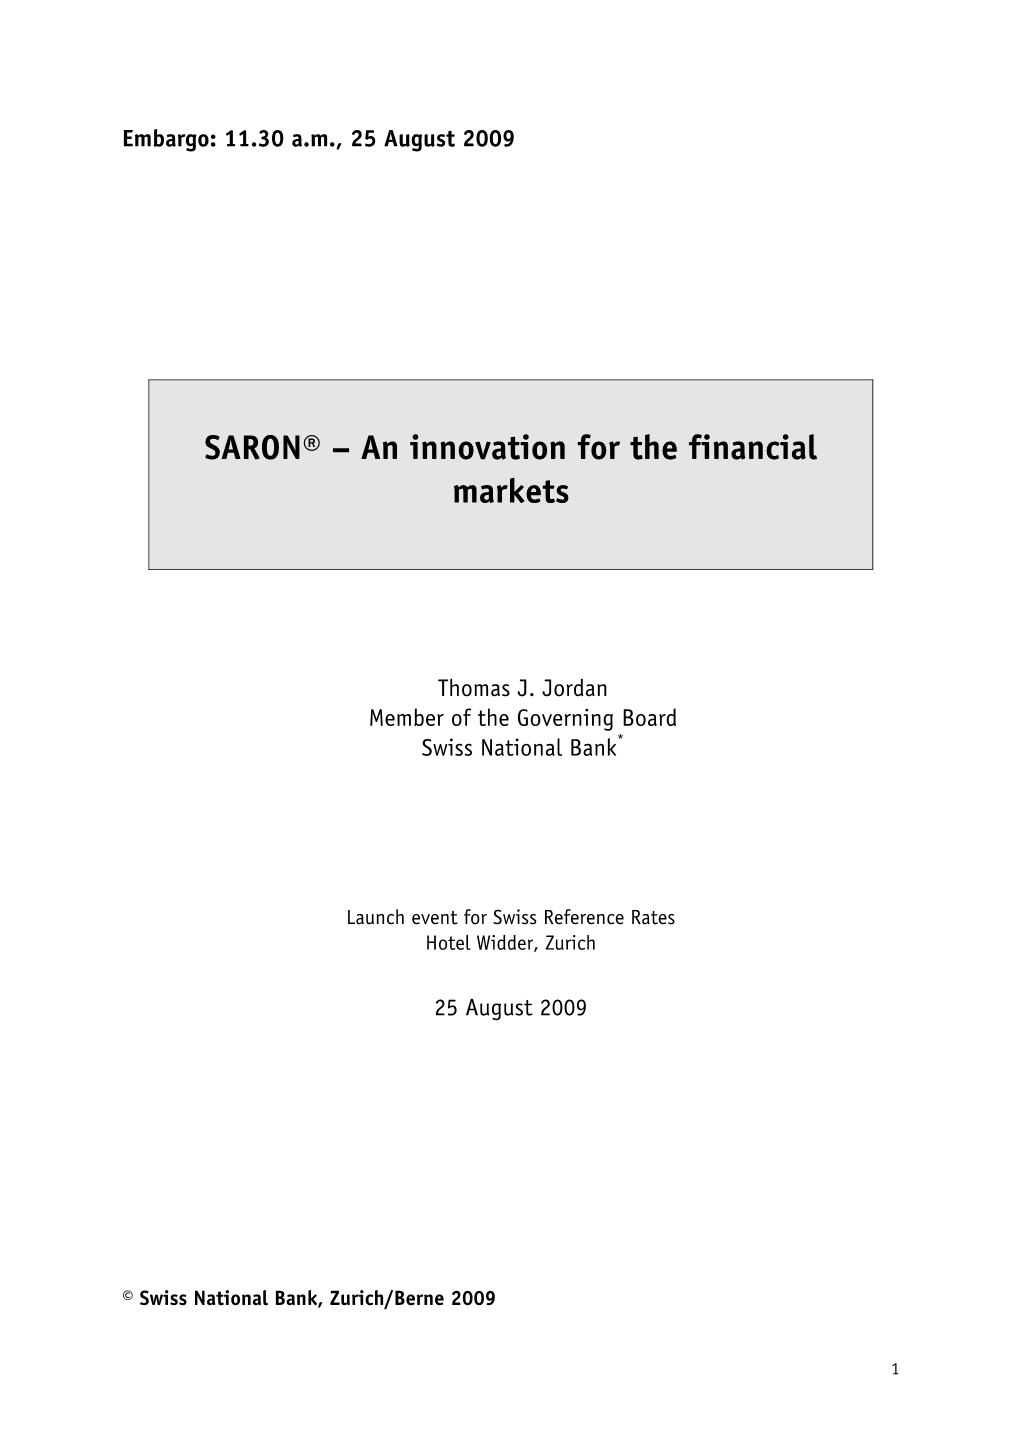 SARON® – an Innovation for the Financial Markets